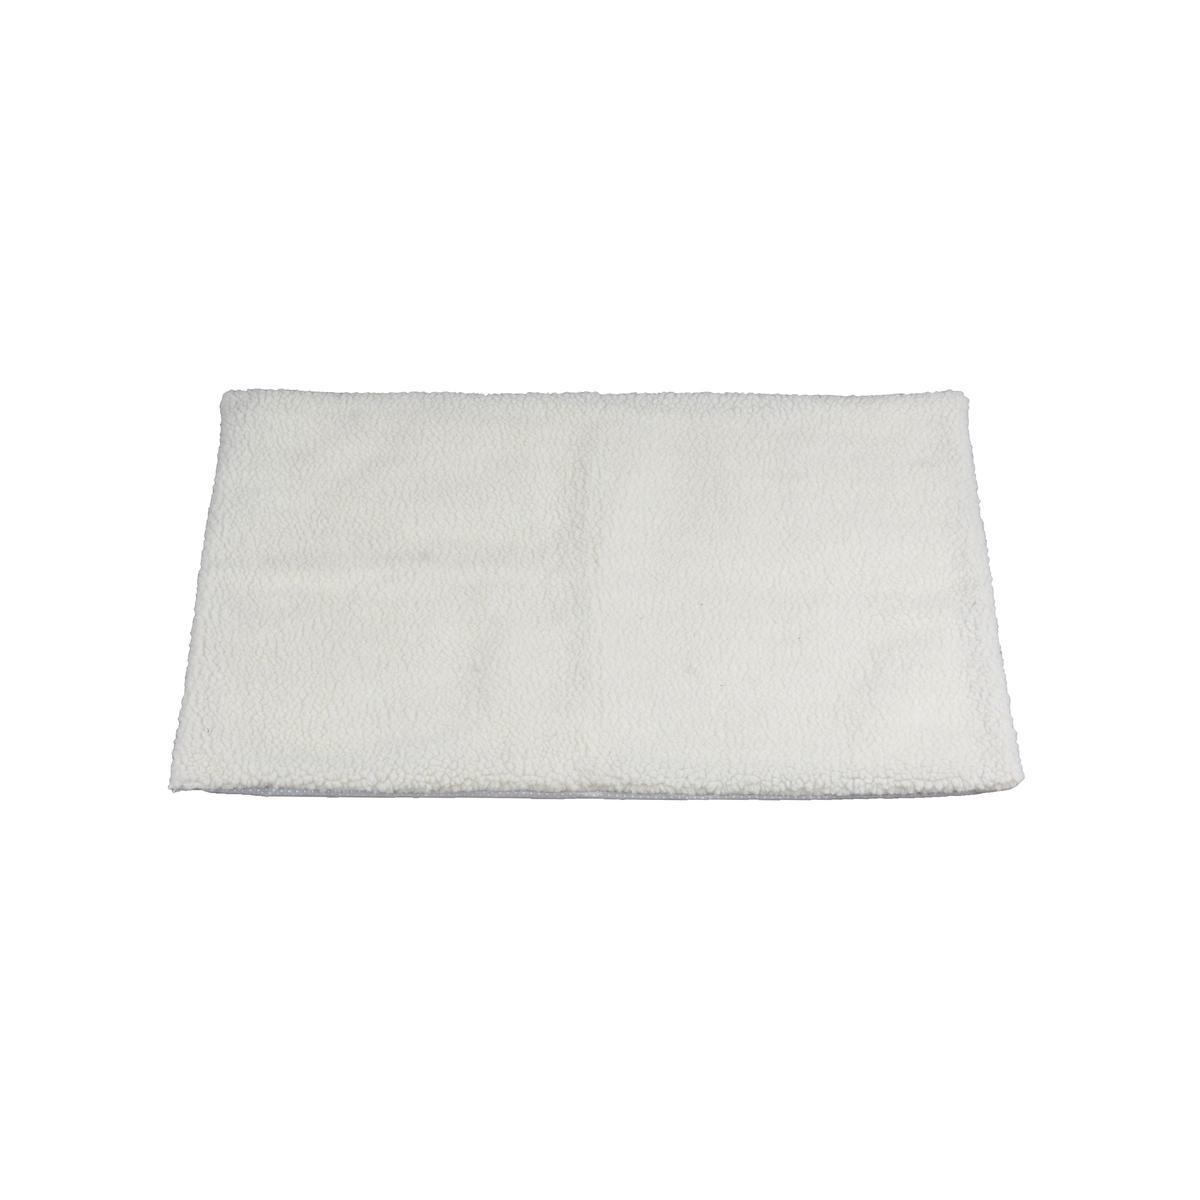 Tapis isolant thermique - Taille S